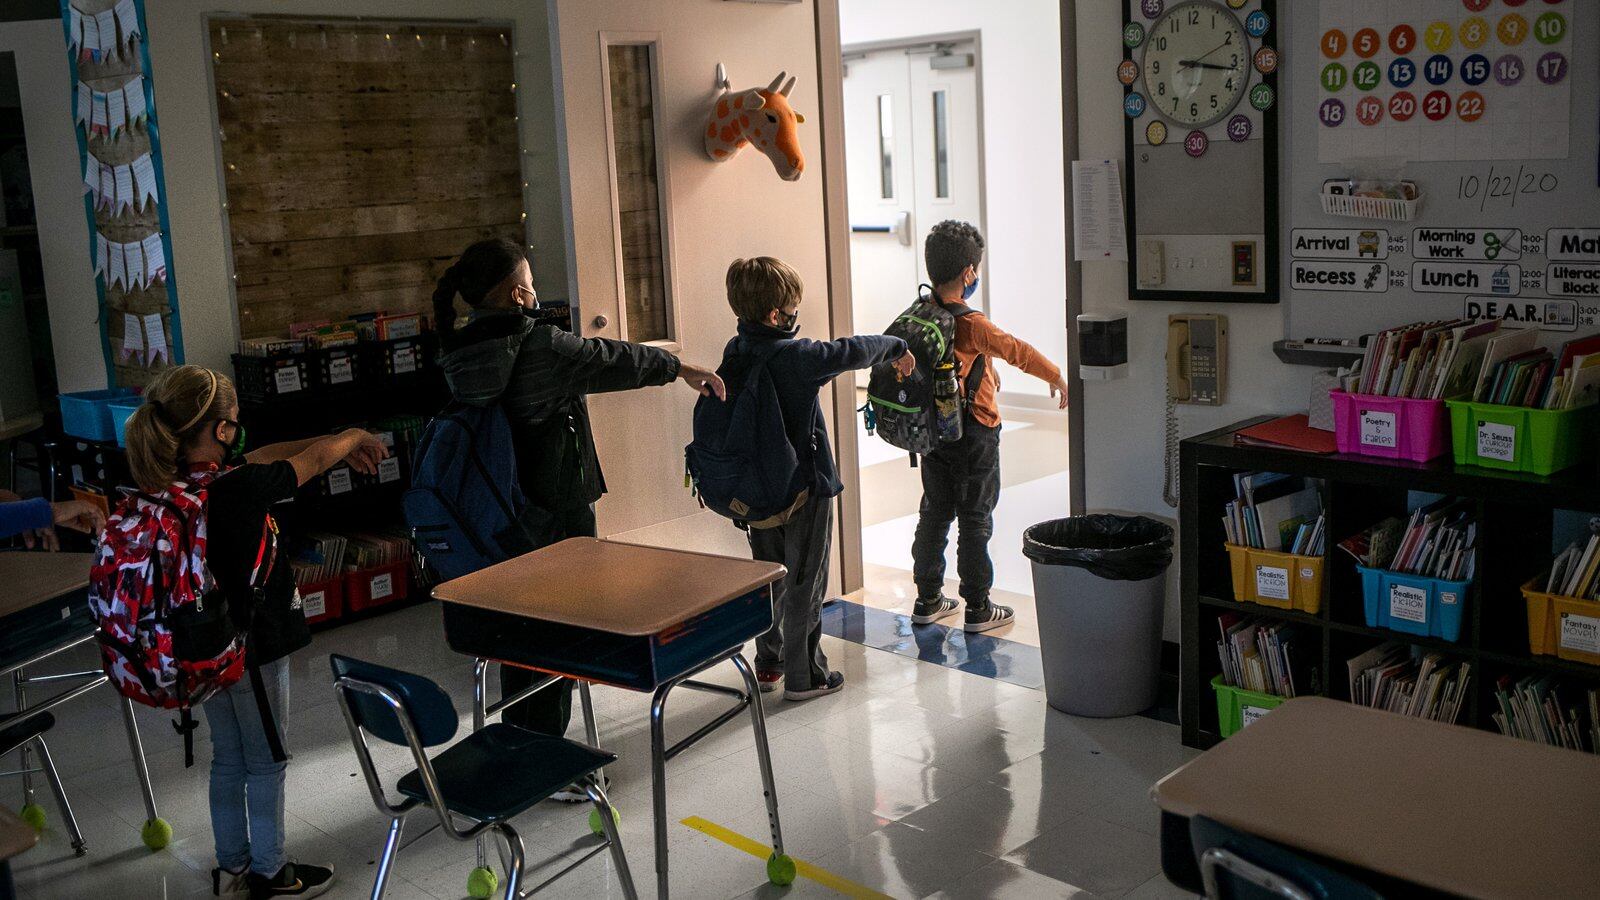 A kindergarten class socially distances while preparing to leave their classroom at Stark Elementary School on October 21, 2020 in Stamford, Connecticut. Stamford Public Schools is continuing the fall semester with a hybrid model of in-class and distance learning, occasionally quarantining individual classes when a student or faculty member tests positive for COVID-19. (Photo by John Moore/Getty Images)